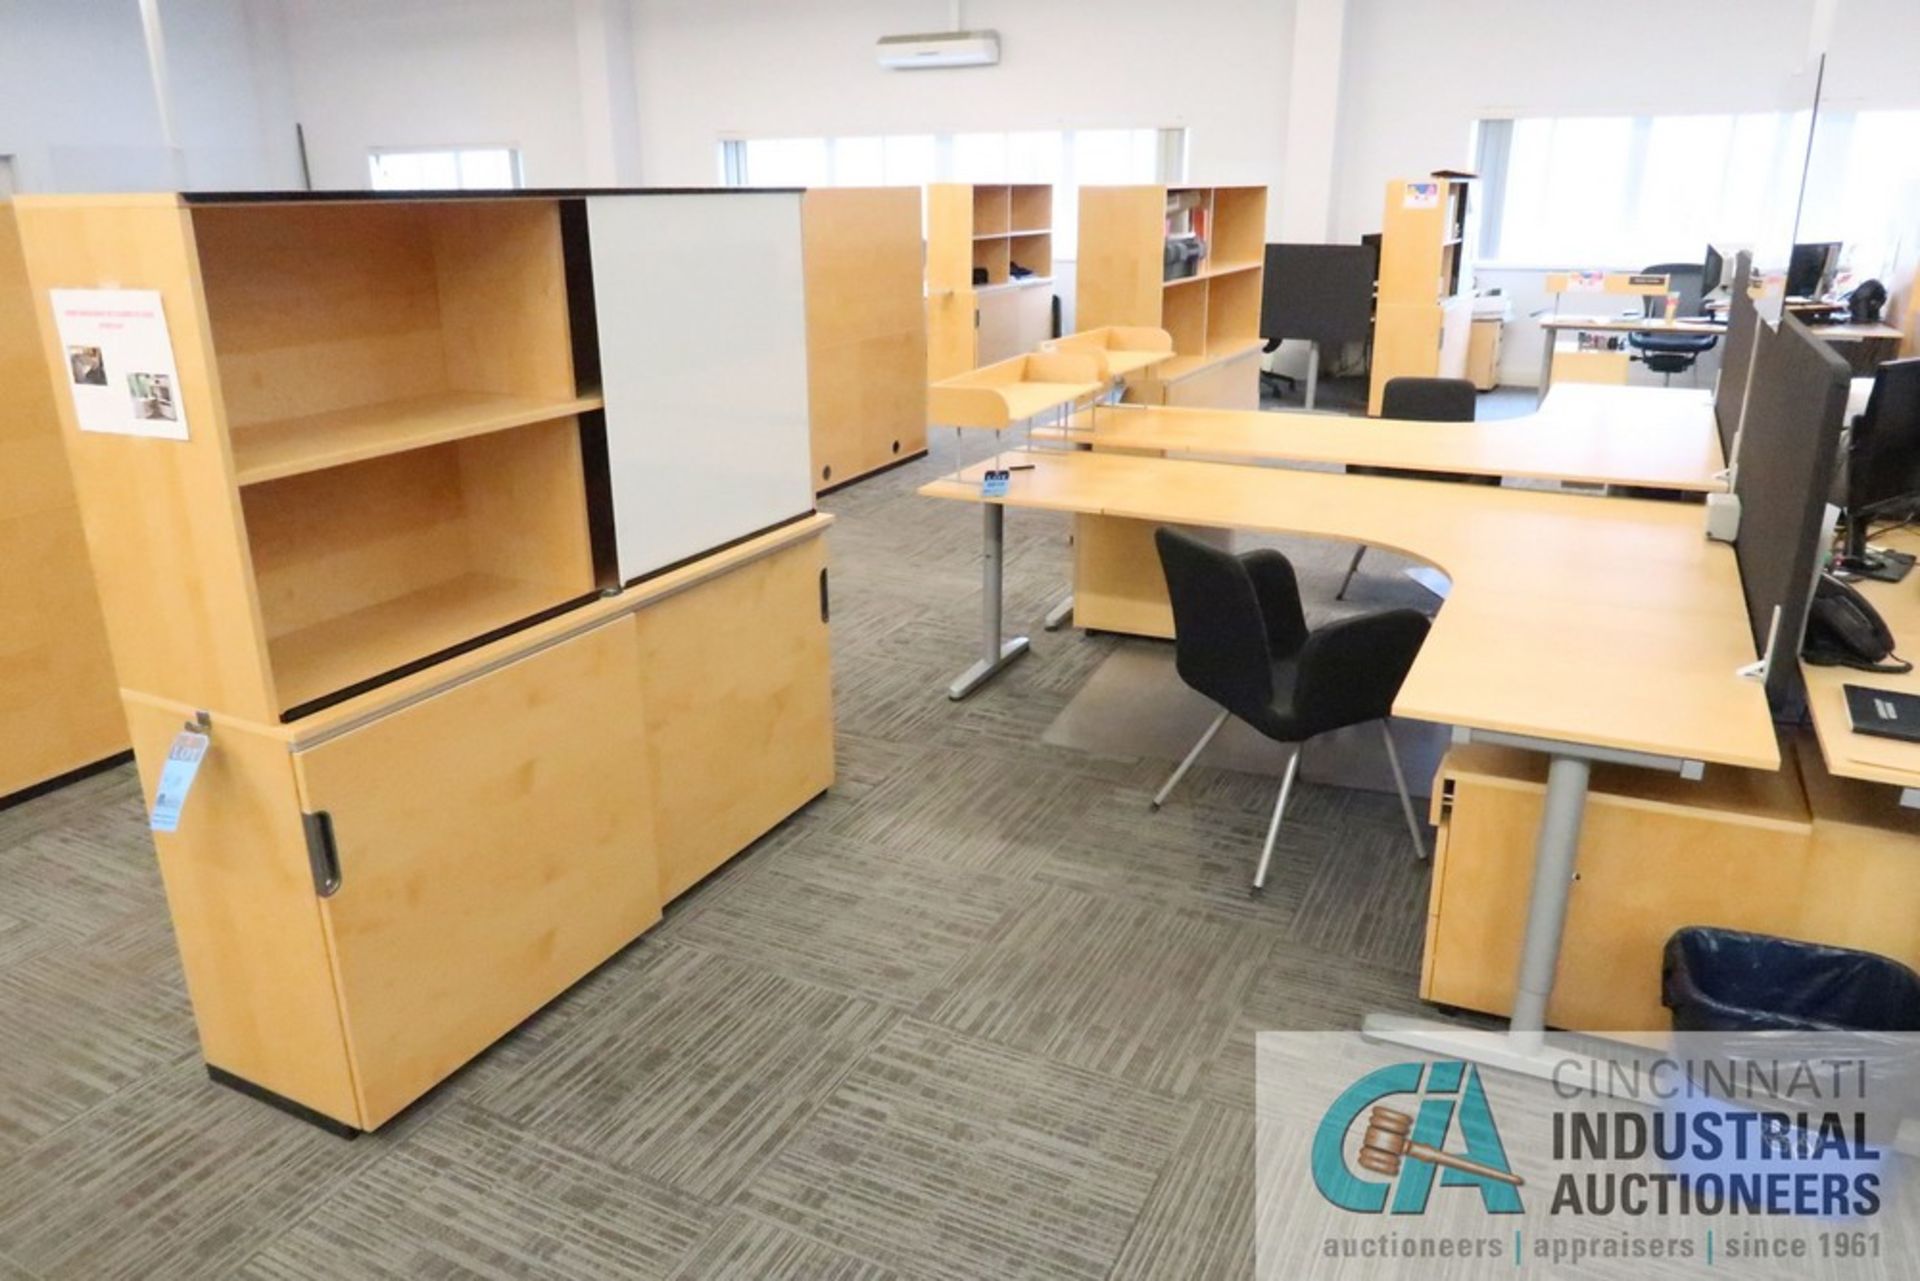 79" X 86" X 24" GALANT L-SHAPED DESK, (1) 3-DRAWER CABINET, (1) BOOKCASE WITH LOWER STORAGE, (1)